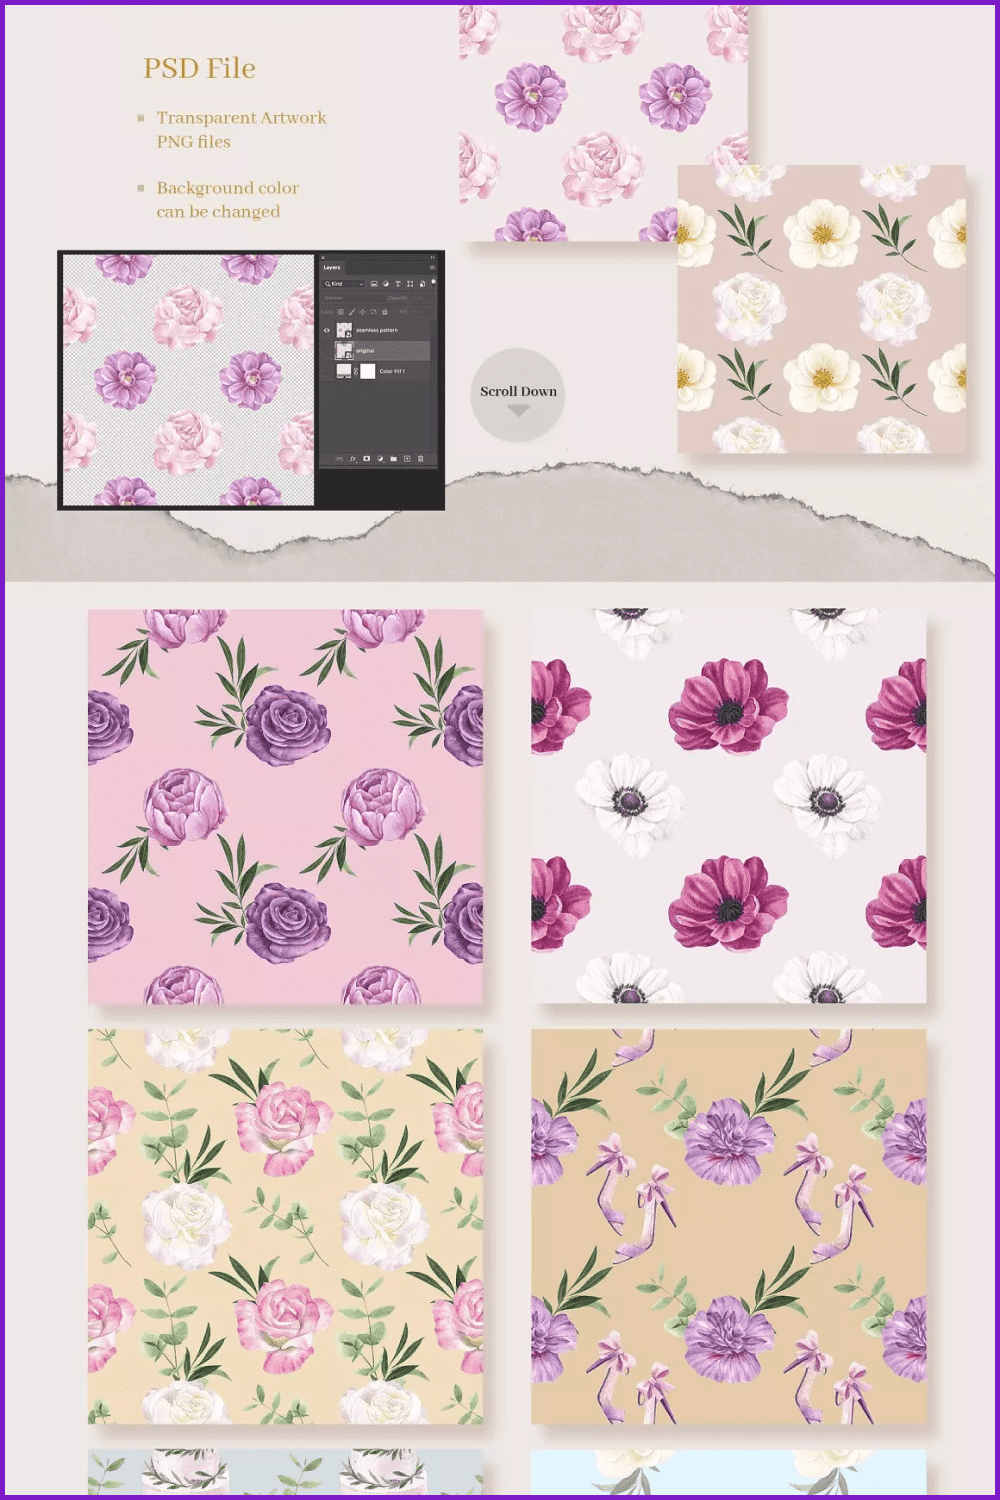 Collage of patterns with lilies of different colors.